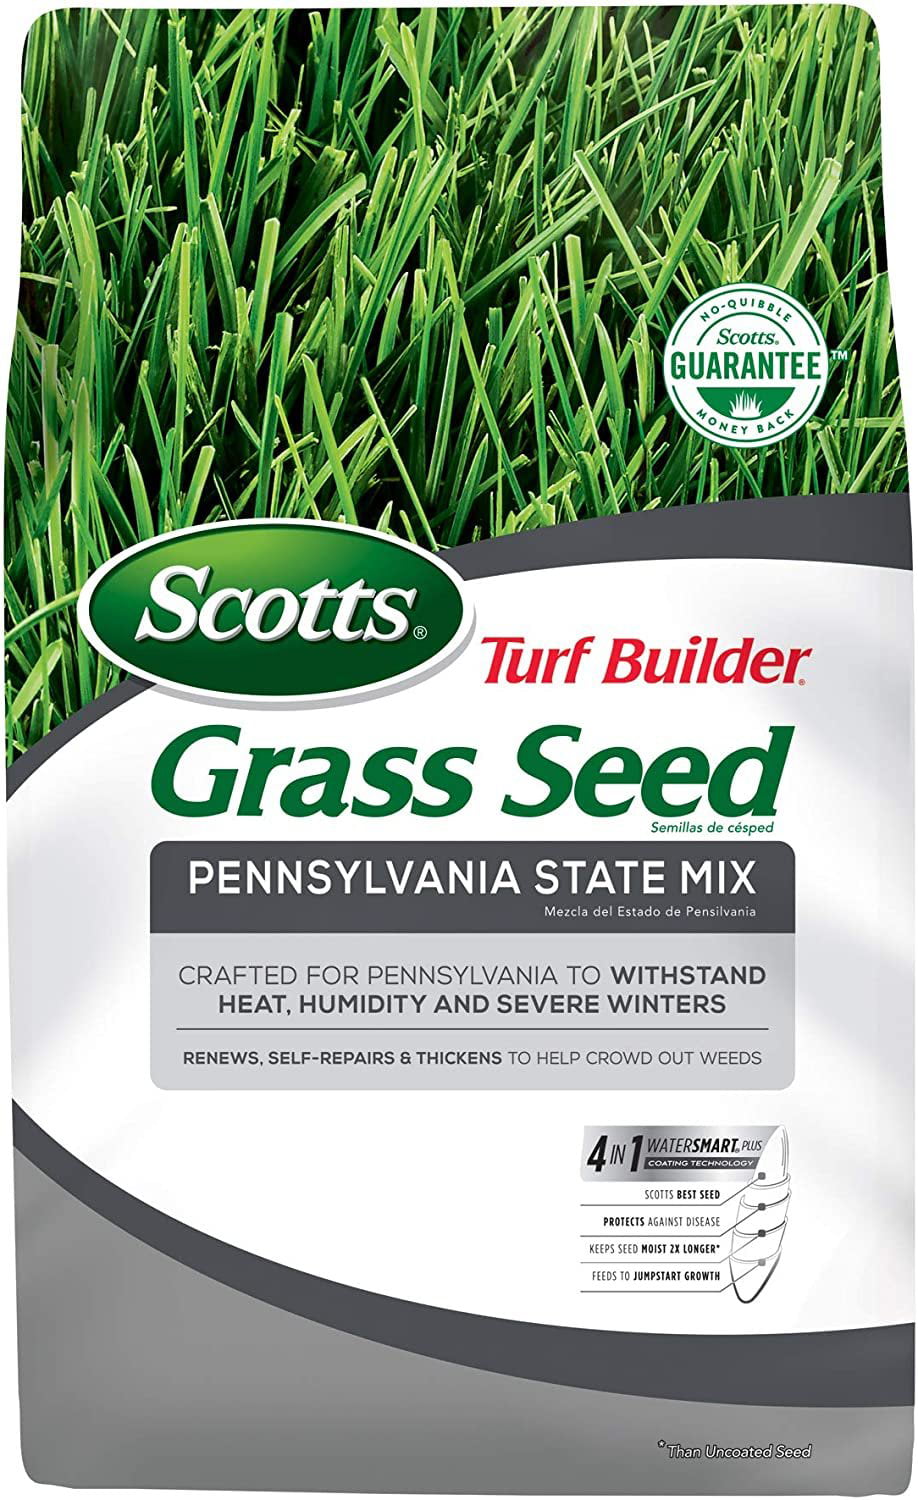 Scotts Turf Builder Grass Seed Pennsylvania State Mix Lbs Developed Specifically For